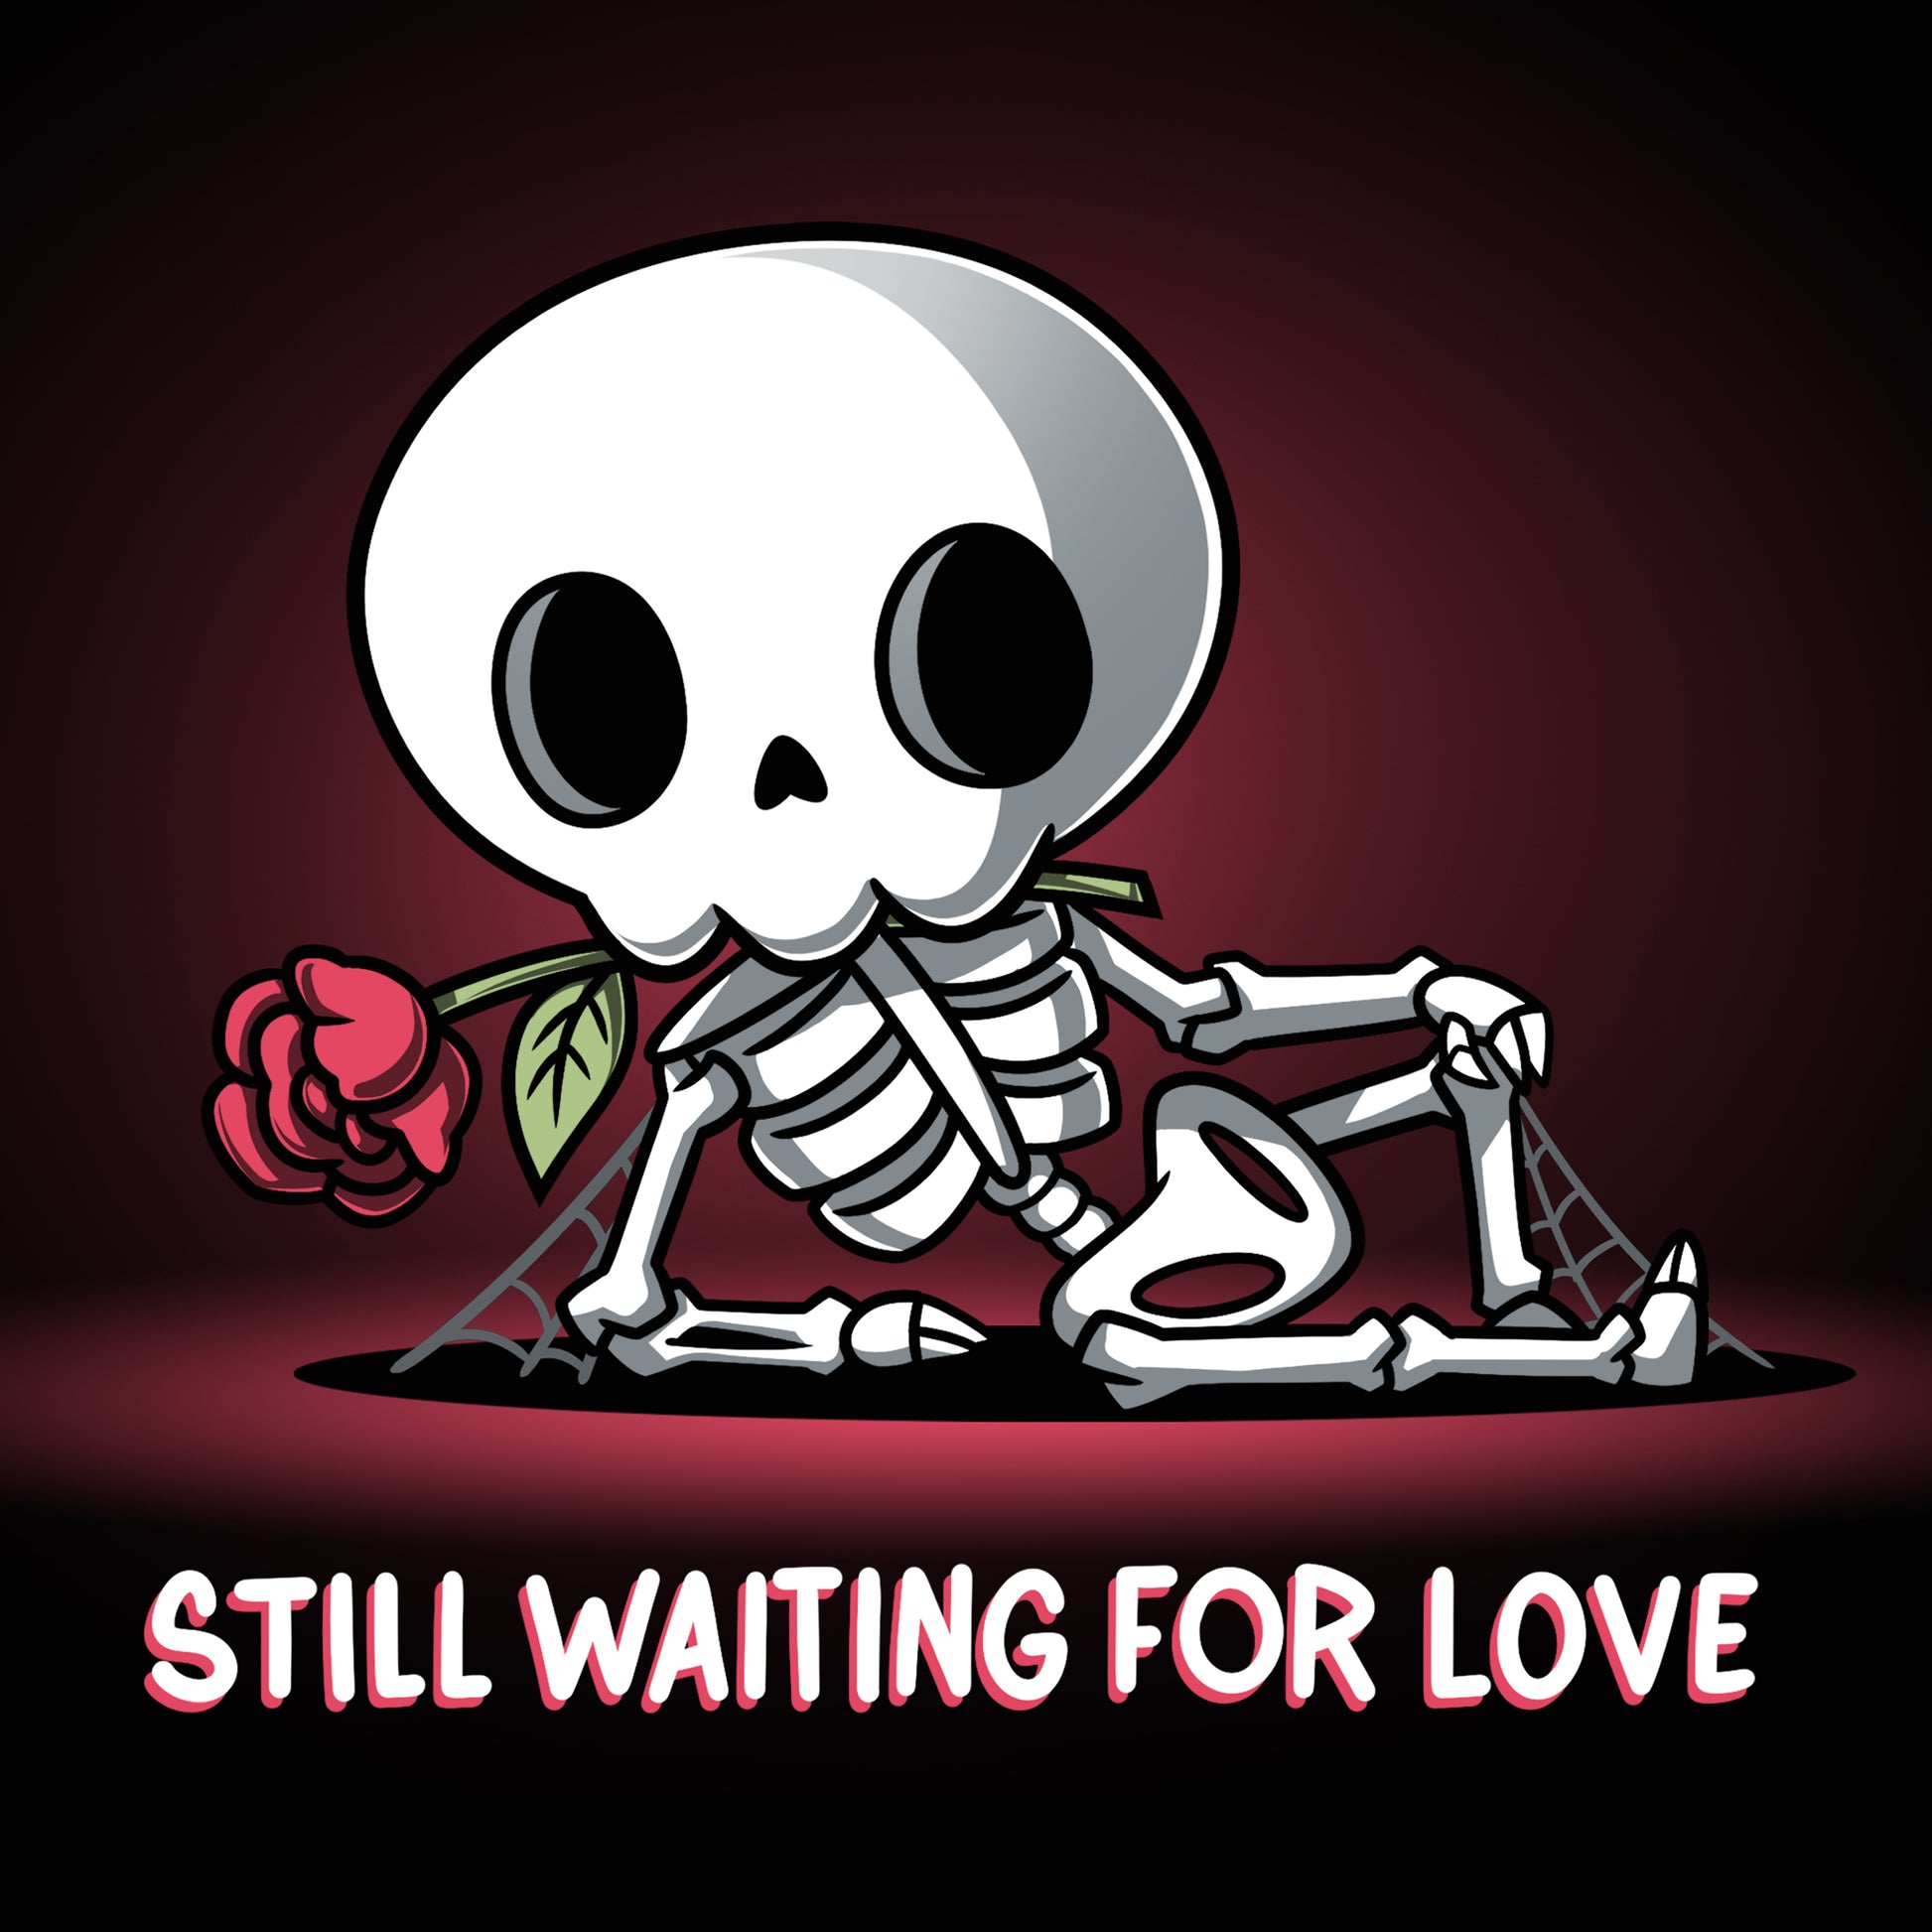 Still waiting for Still Waiting For Love in a TeeTurtle black t-shirt.